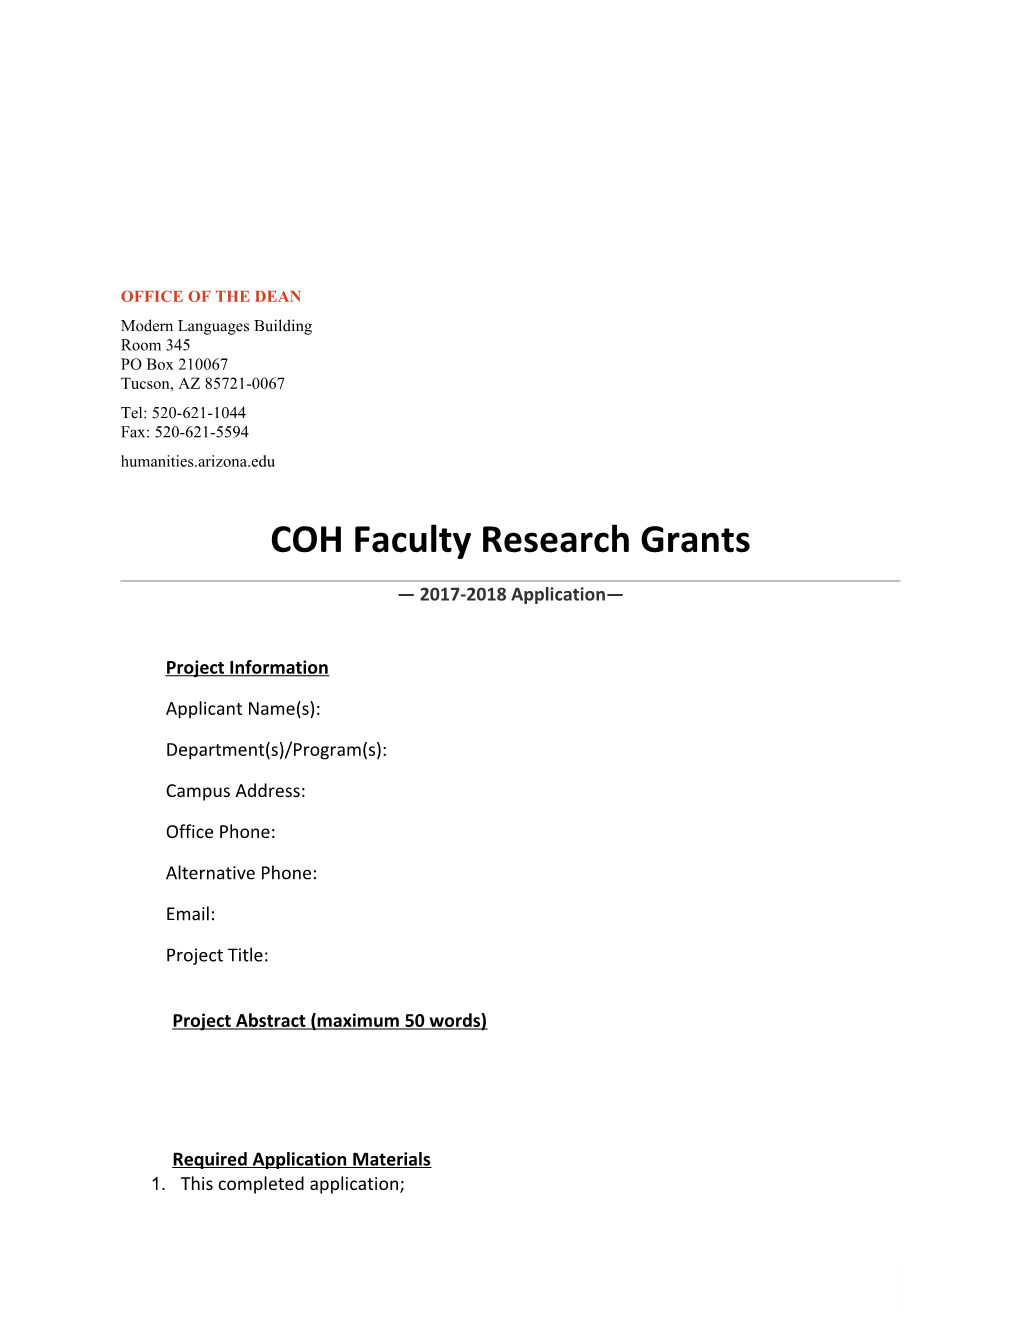 COH Faculty Research Grants